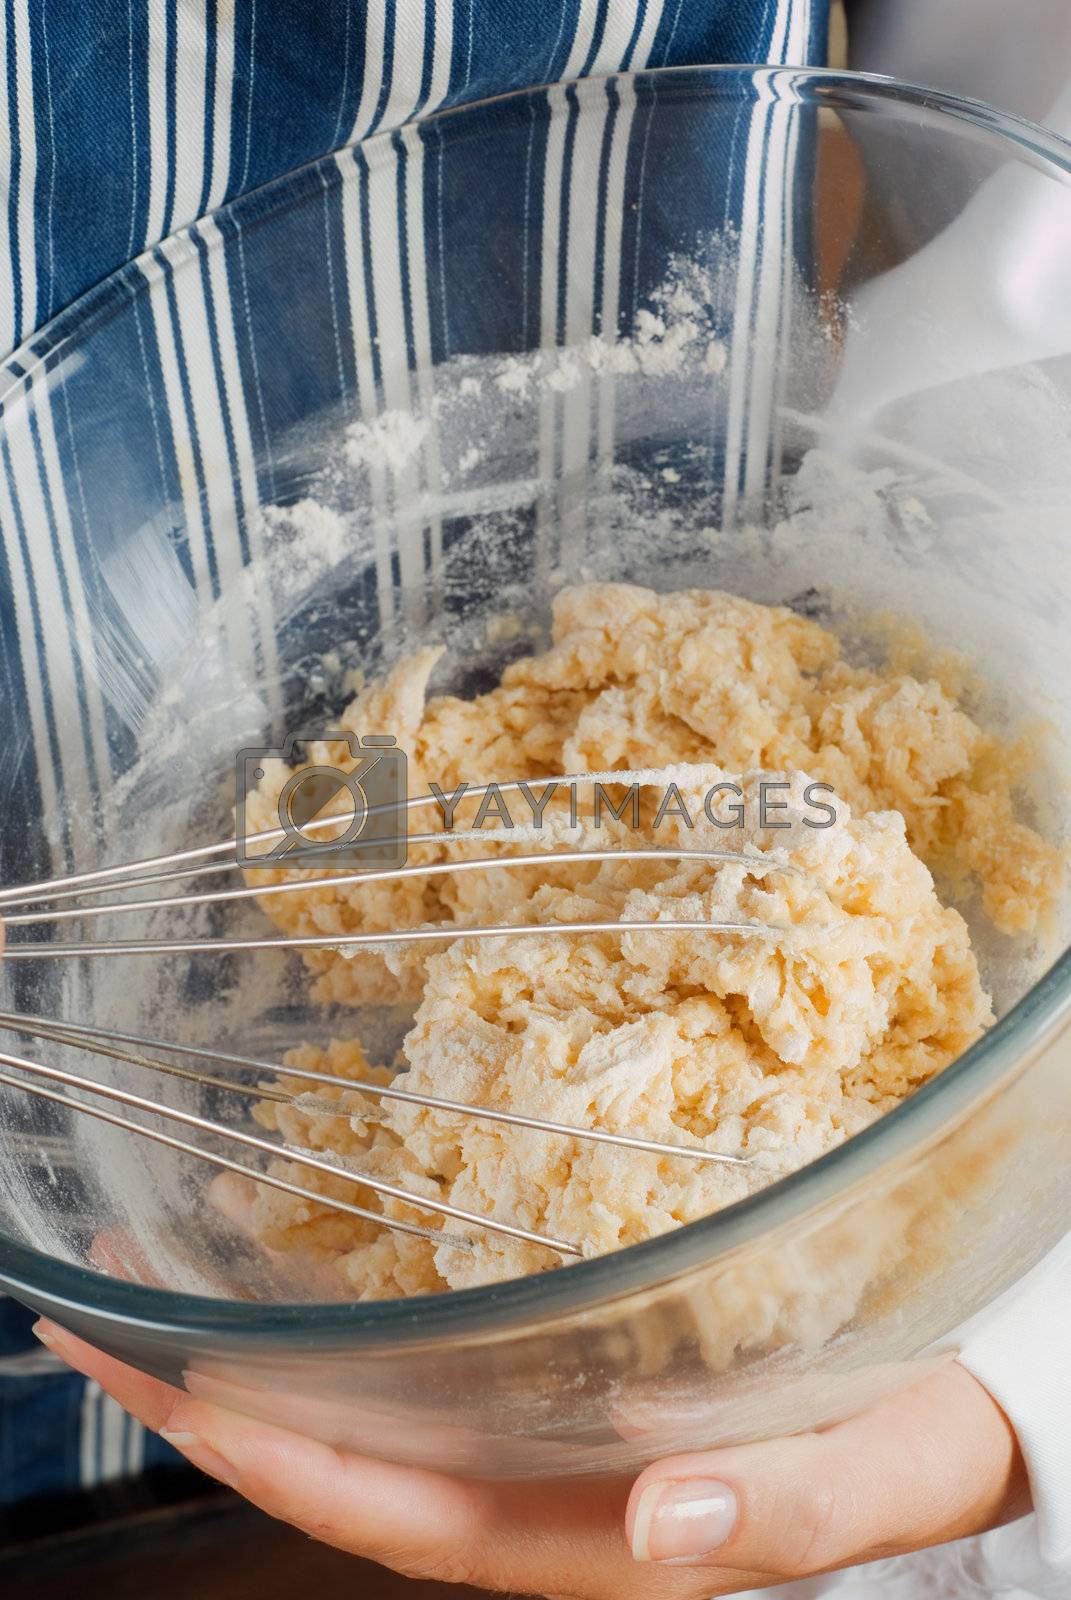 Royalty free image of Cooking making pancake mixture by alistaircotton